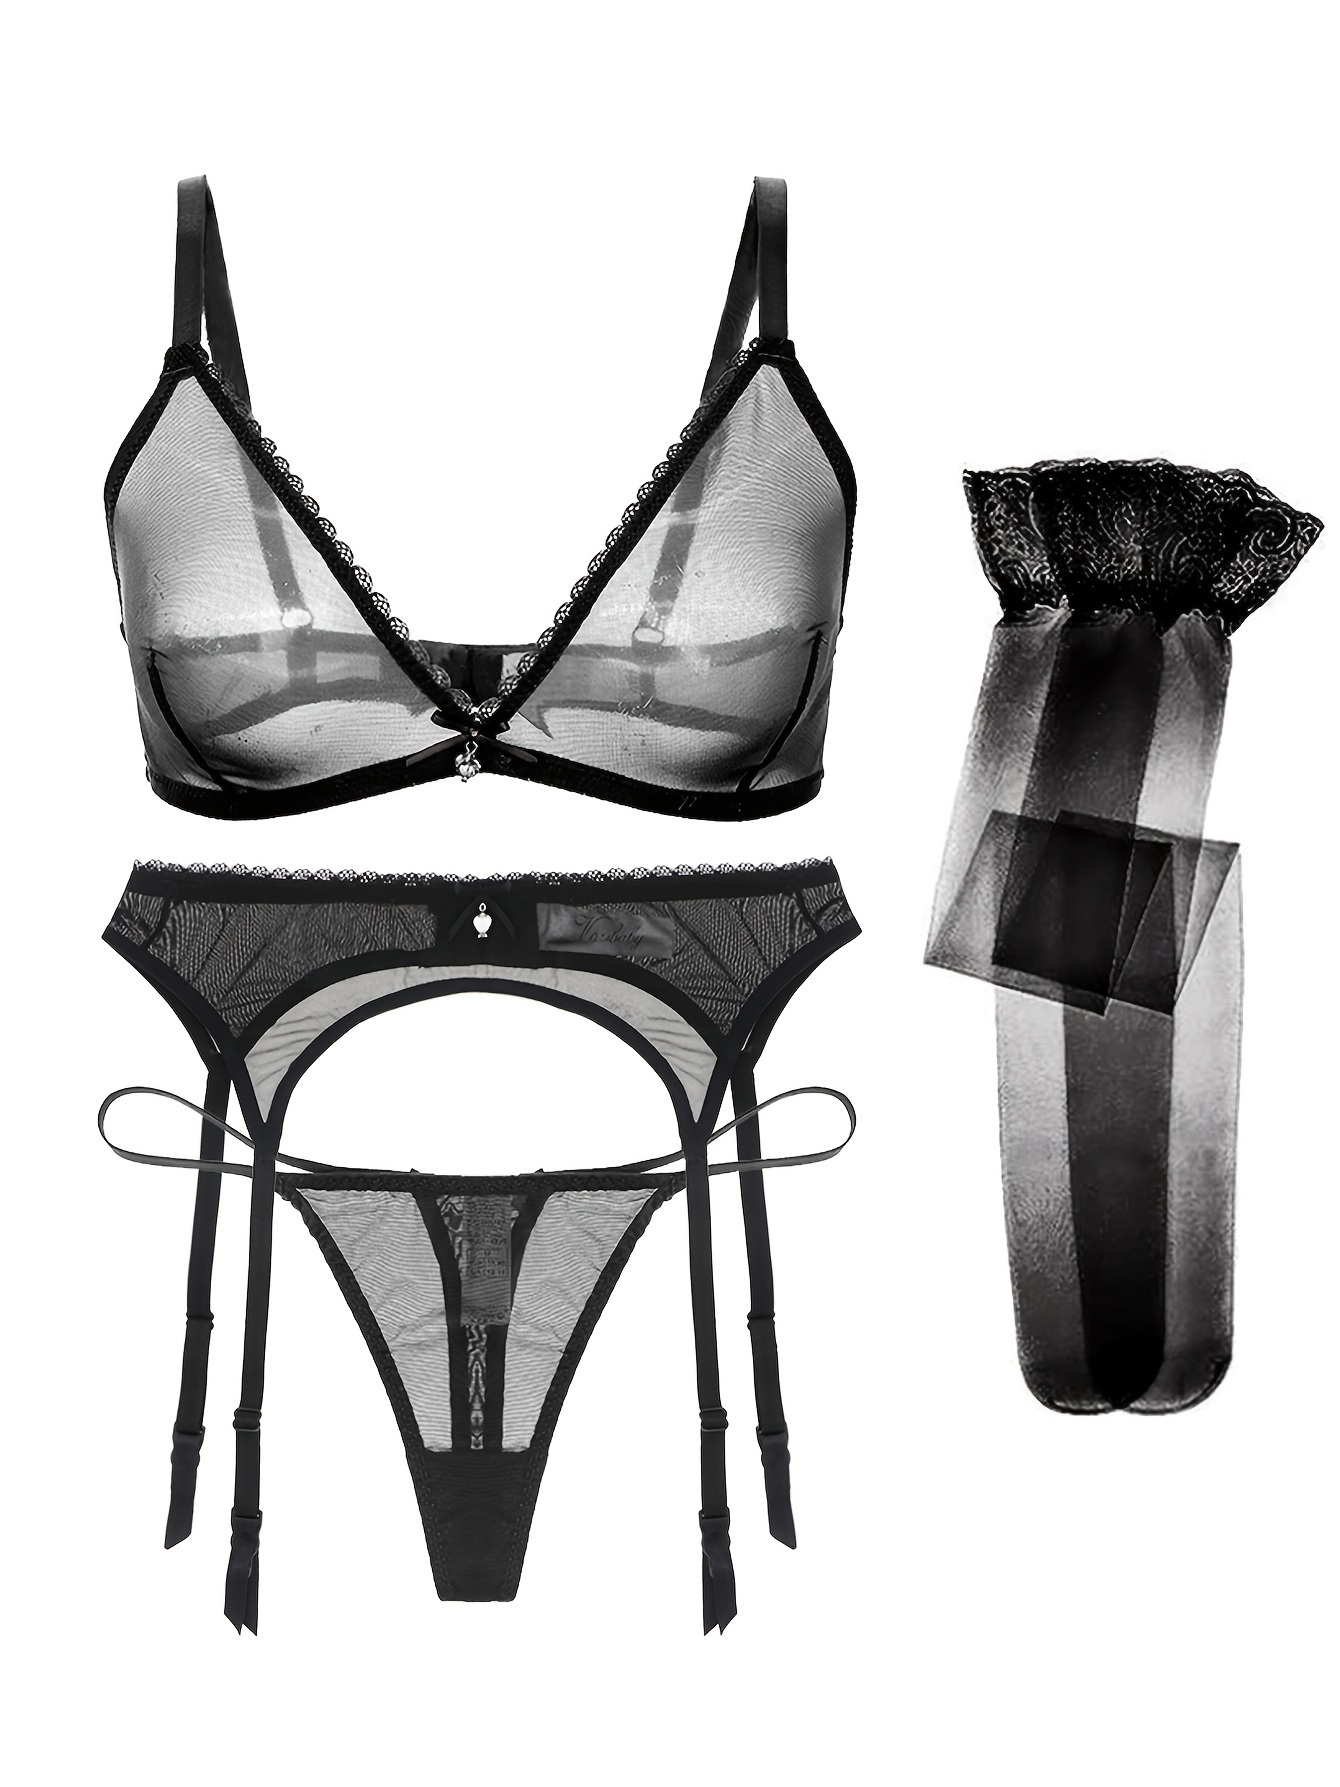 Perspective Sexy Women Female Lingerie Harness Plus Size Bra And Panty Set  Panty Lace Underwear